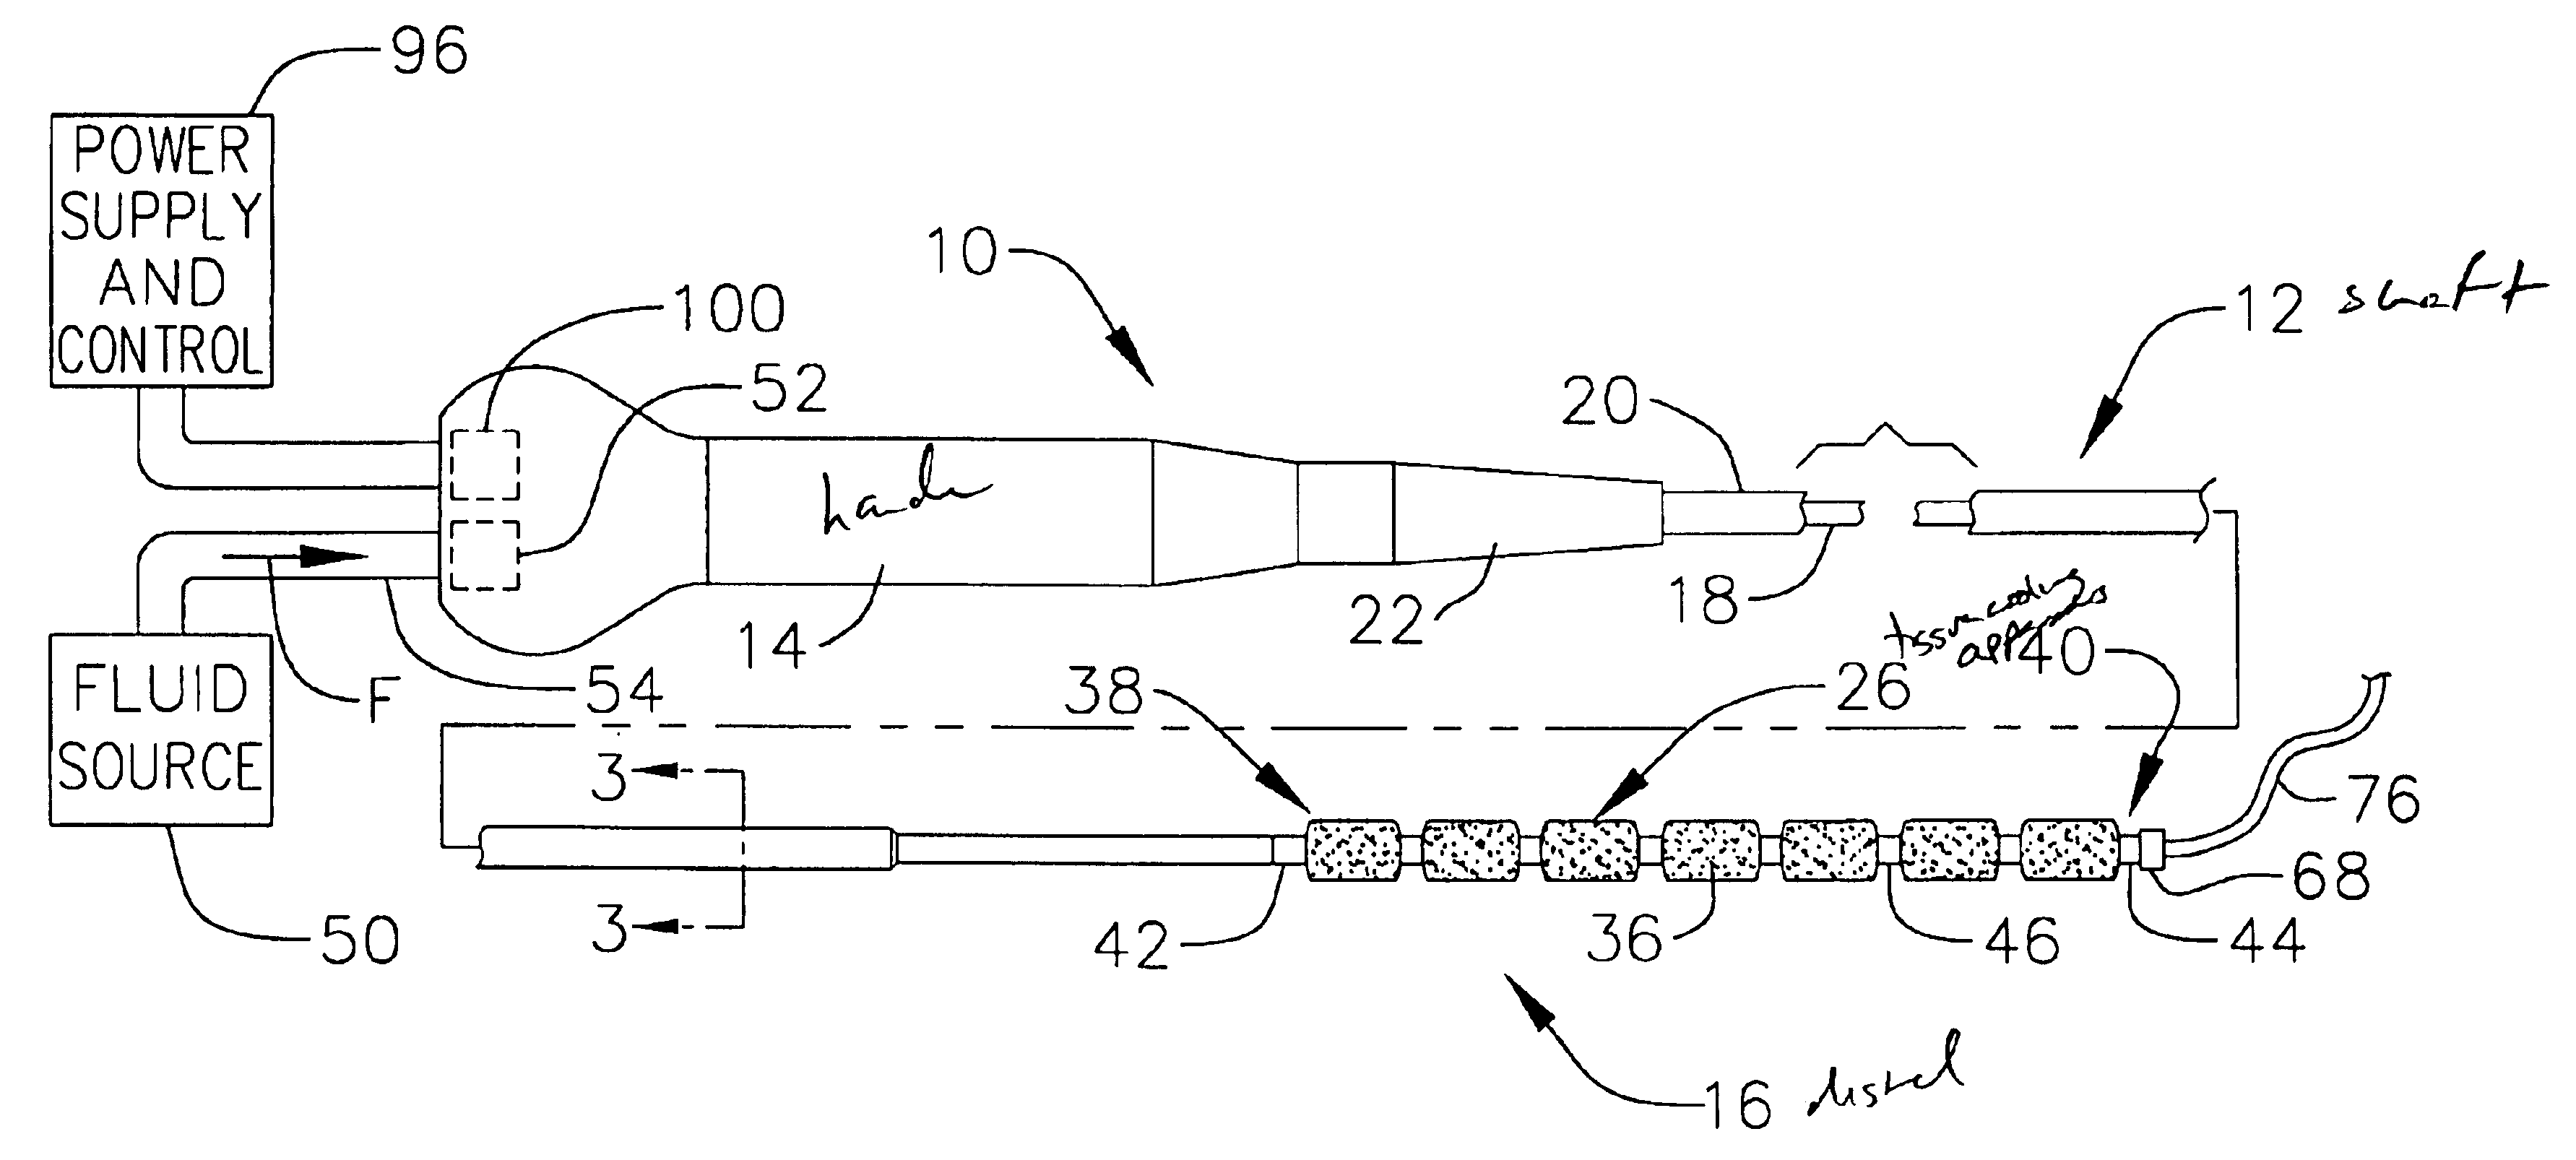 Fluid cooled apparatus for supporting diagnostic and therapeutic elements in contact with tissue